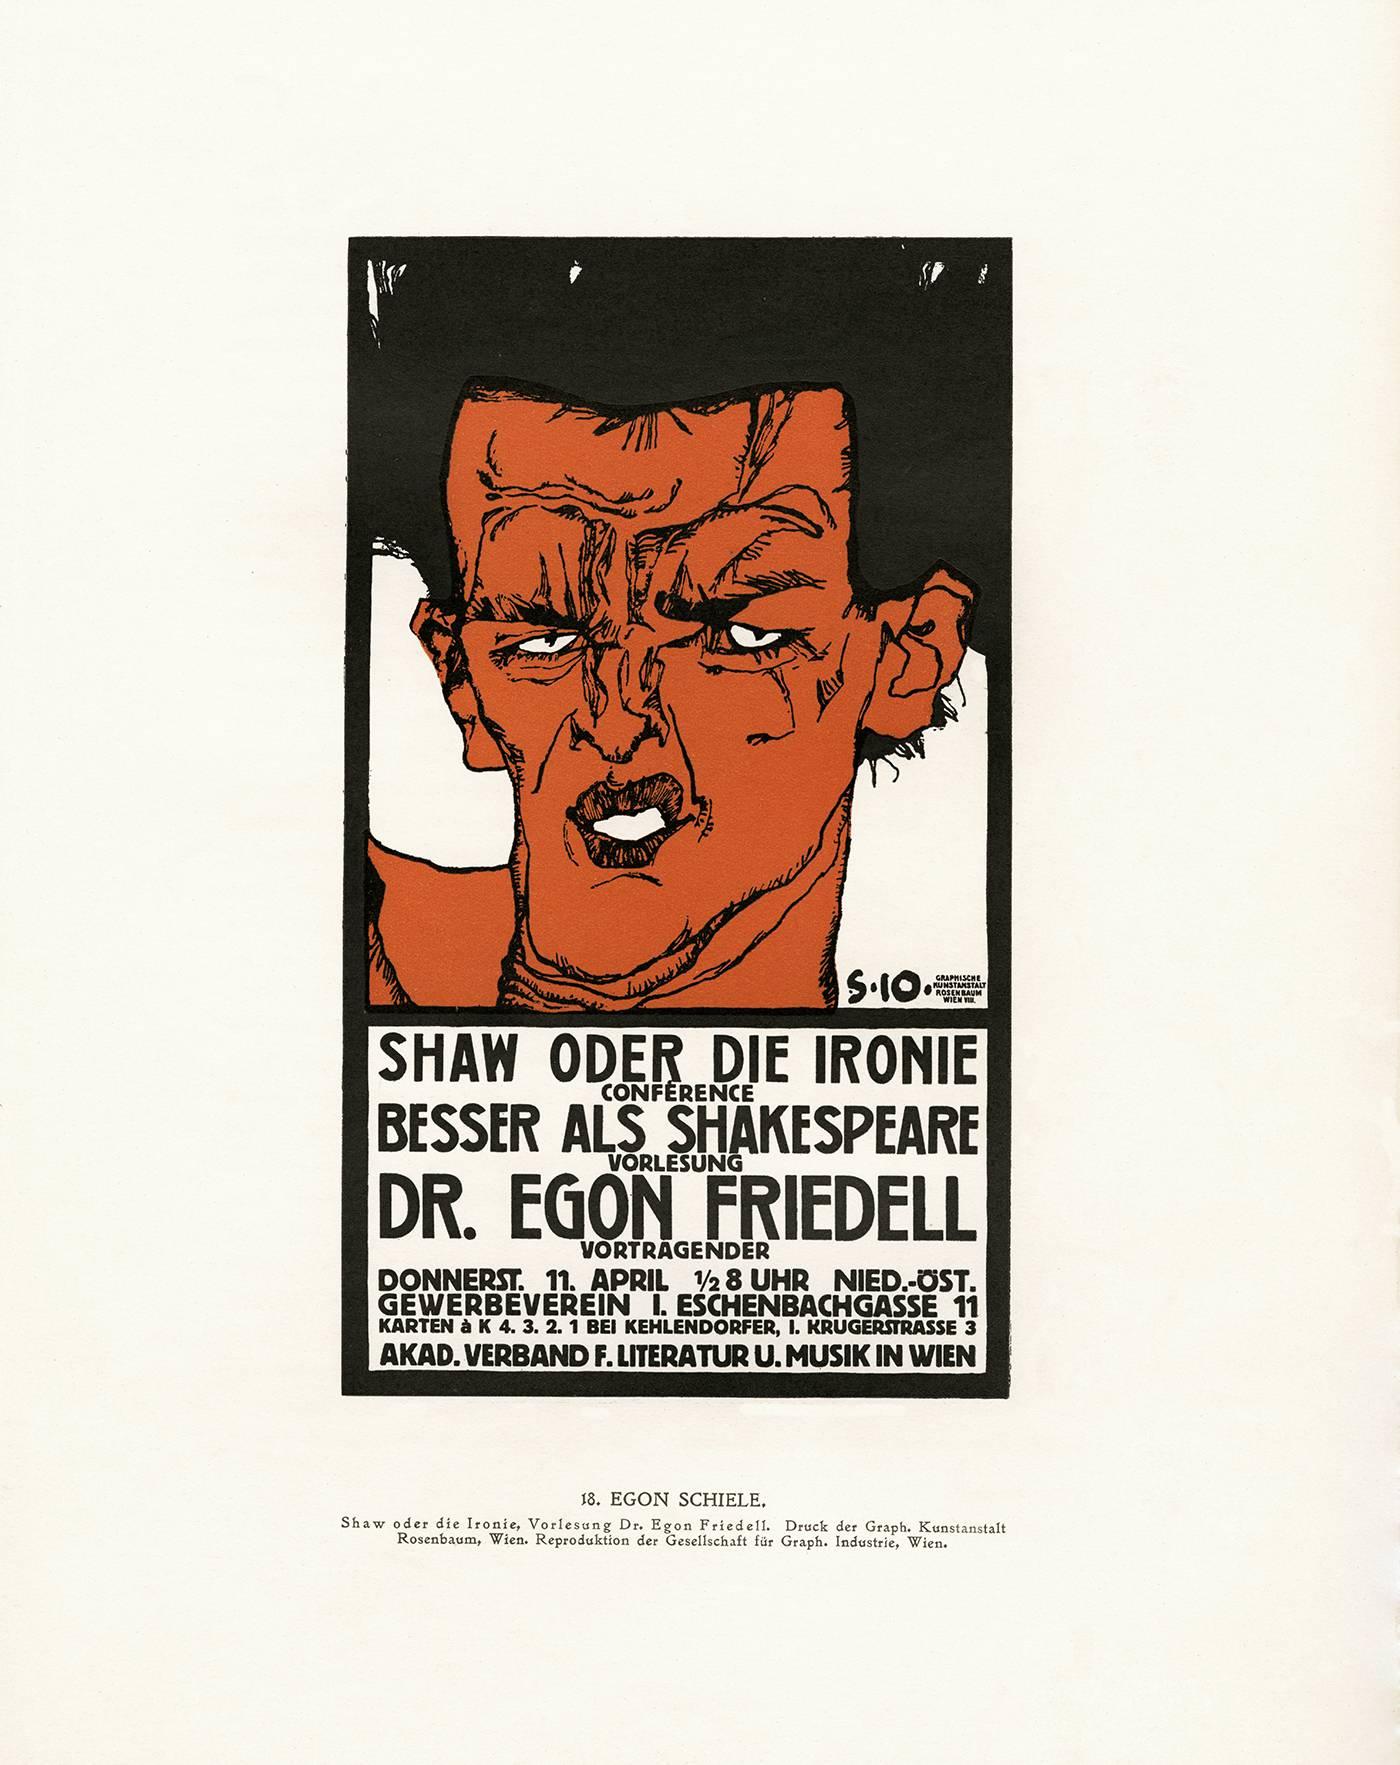 after EGON SCHIELE (1890-1918) SHAW ODER DIE IRONIE POSTER, C. 1912, (In Mascha, no. 18) Schiele’s poster is an advertisement for a lecture to be given by Egon Friedell (1878-1938). A prominent  member of Viennese artistic society, Friedell